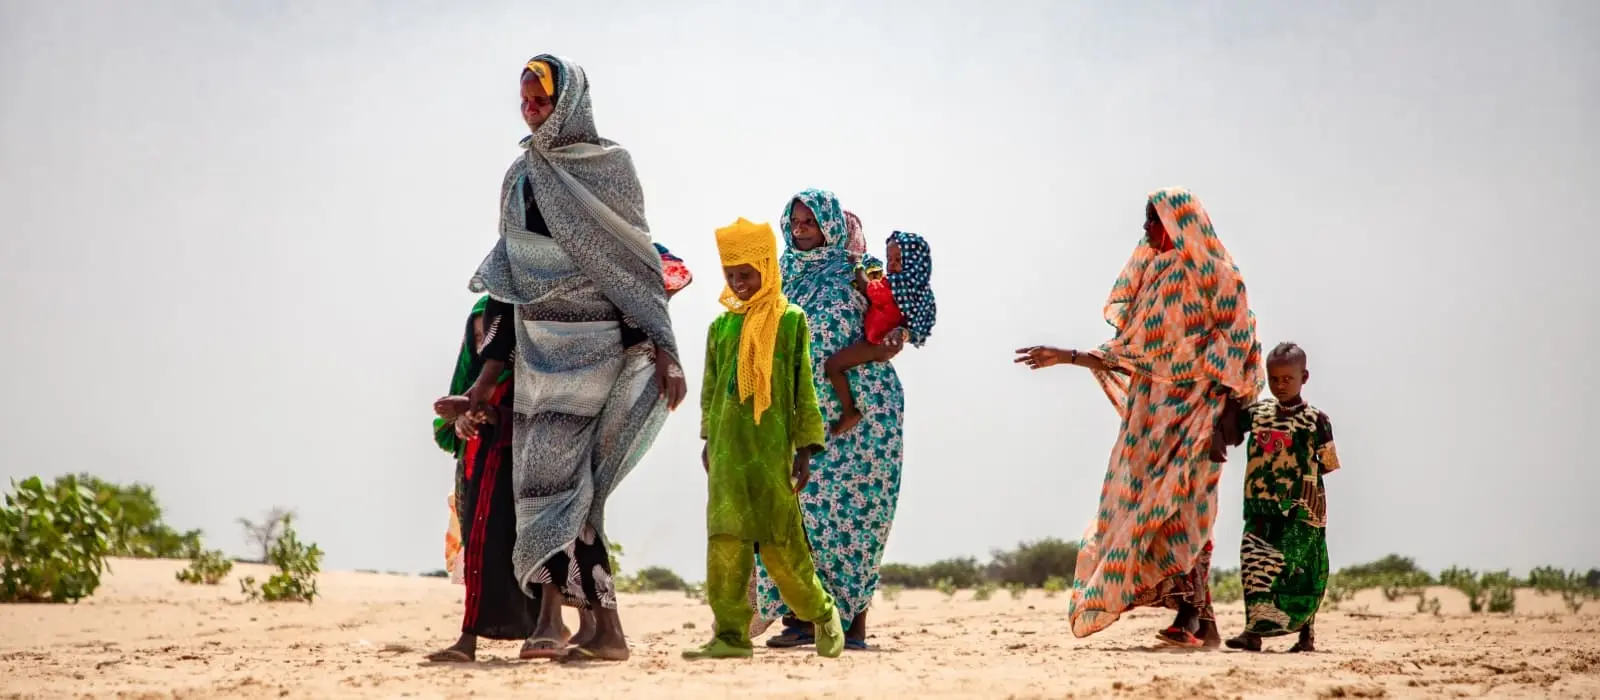 Women and children in the barren landscape of the Lake Chad region.